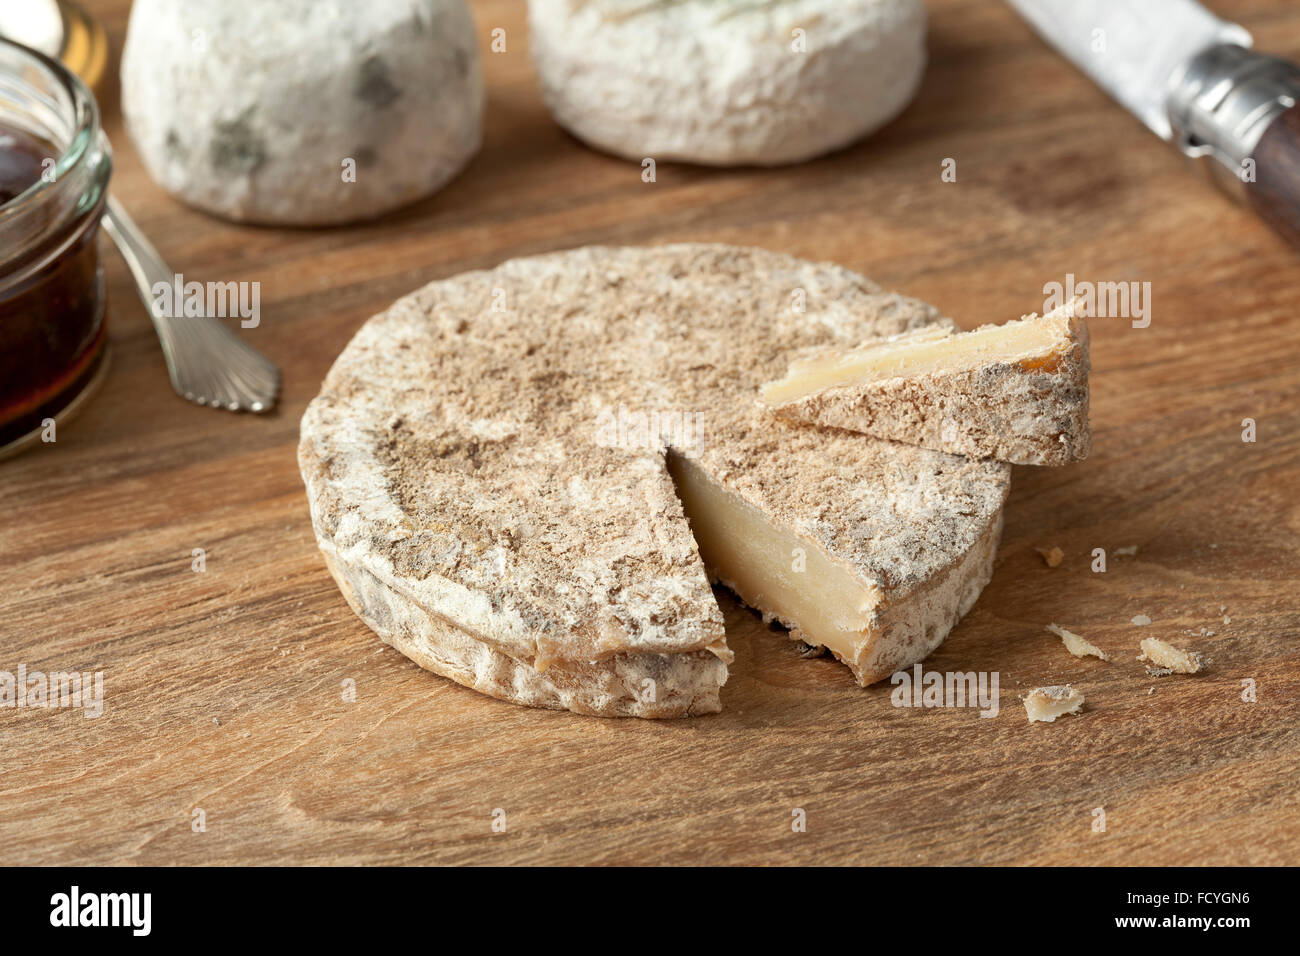 Traditional french goats cheese three weeks old Stock Photo